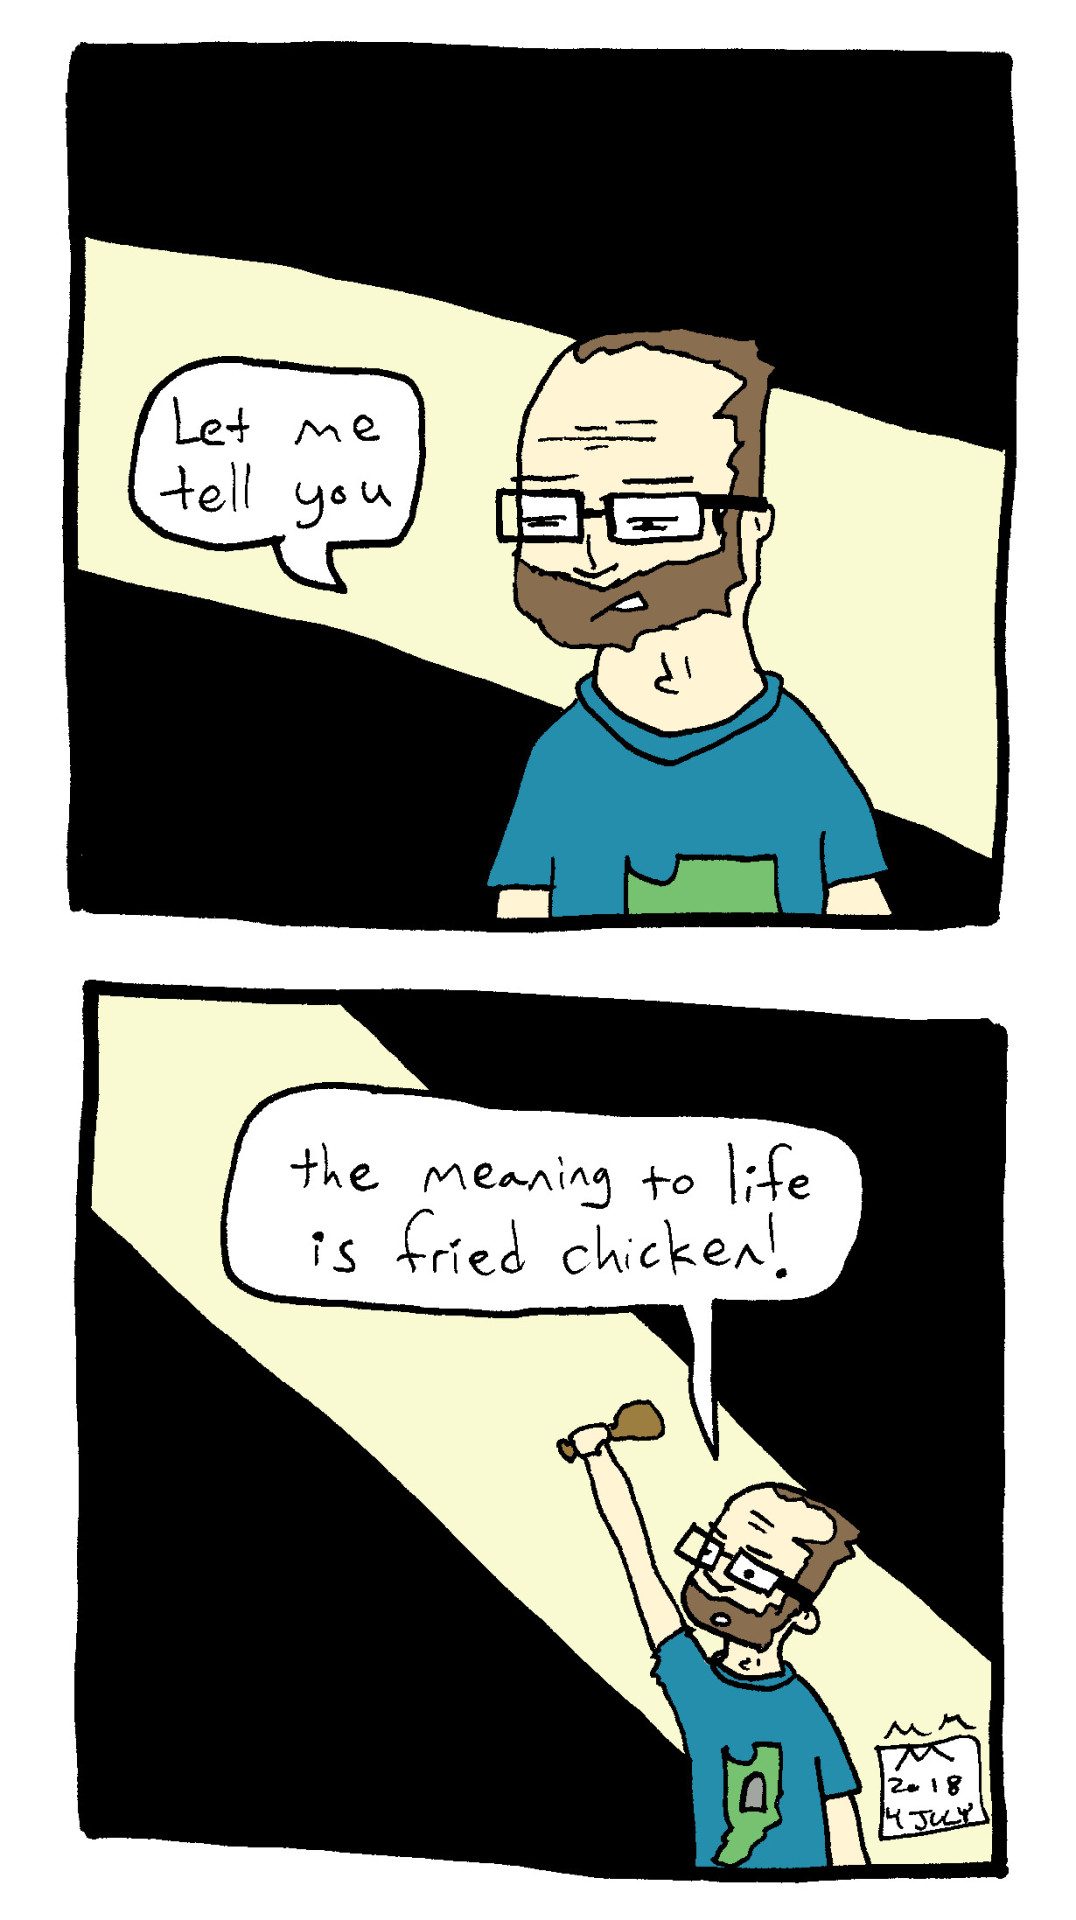 national fried chicken day (2018) check out more of my comics at mini dove comics, @retail-comics, & @sketchesmick, plus like the facebook page for more comic fun.